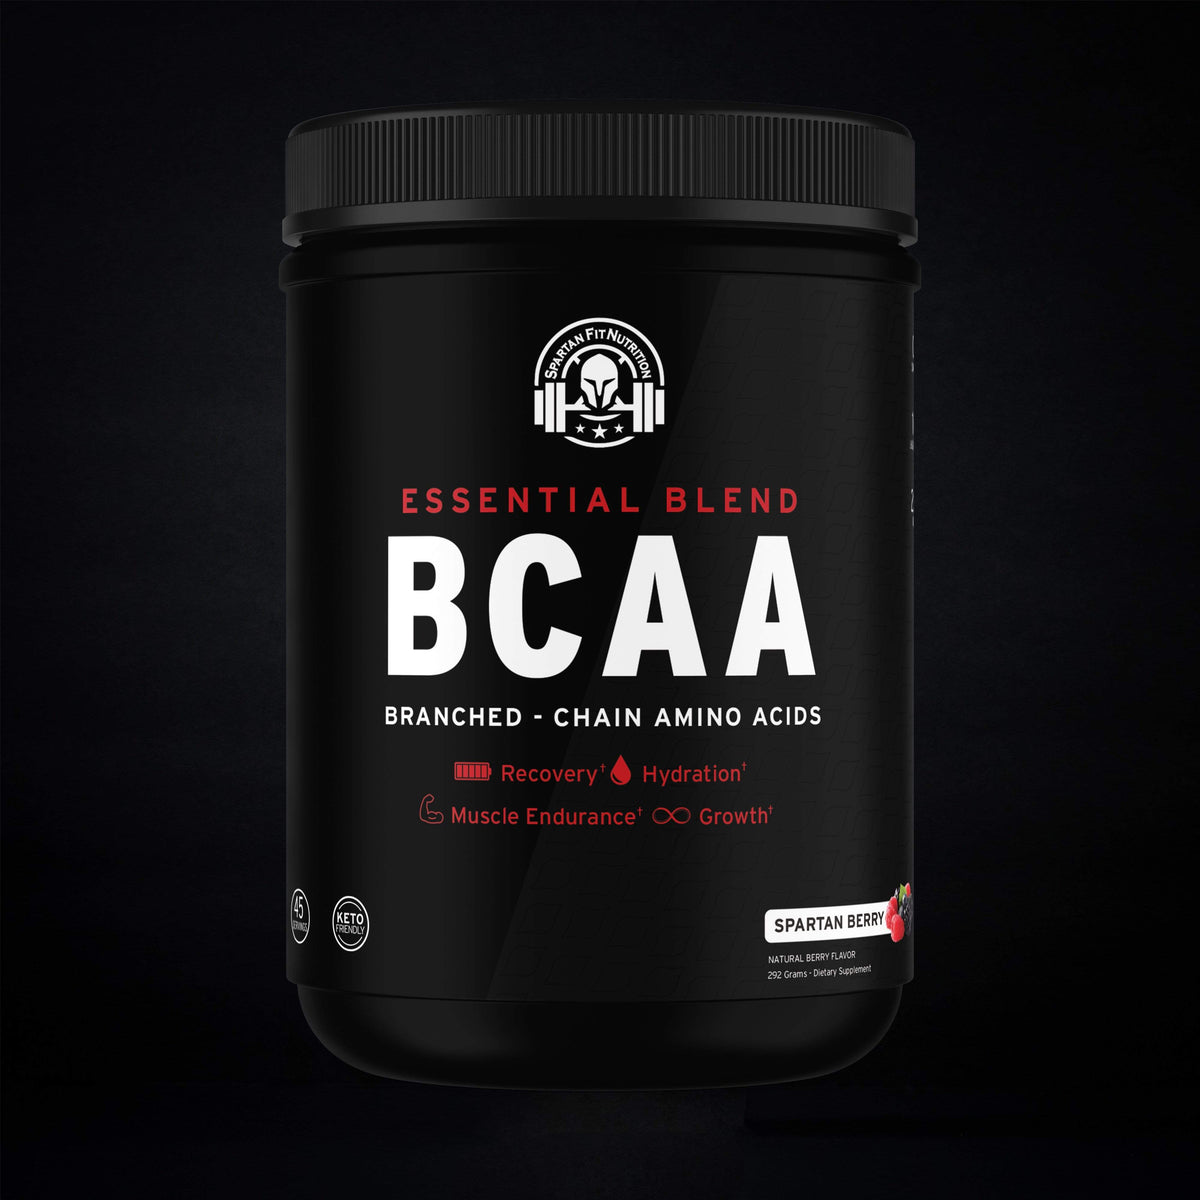 Spartan Fit Nutrition Supplement Essential BCAA&#39;s for movement muscle mood and motivation